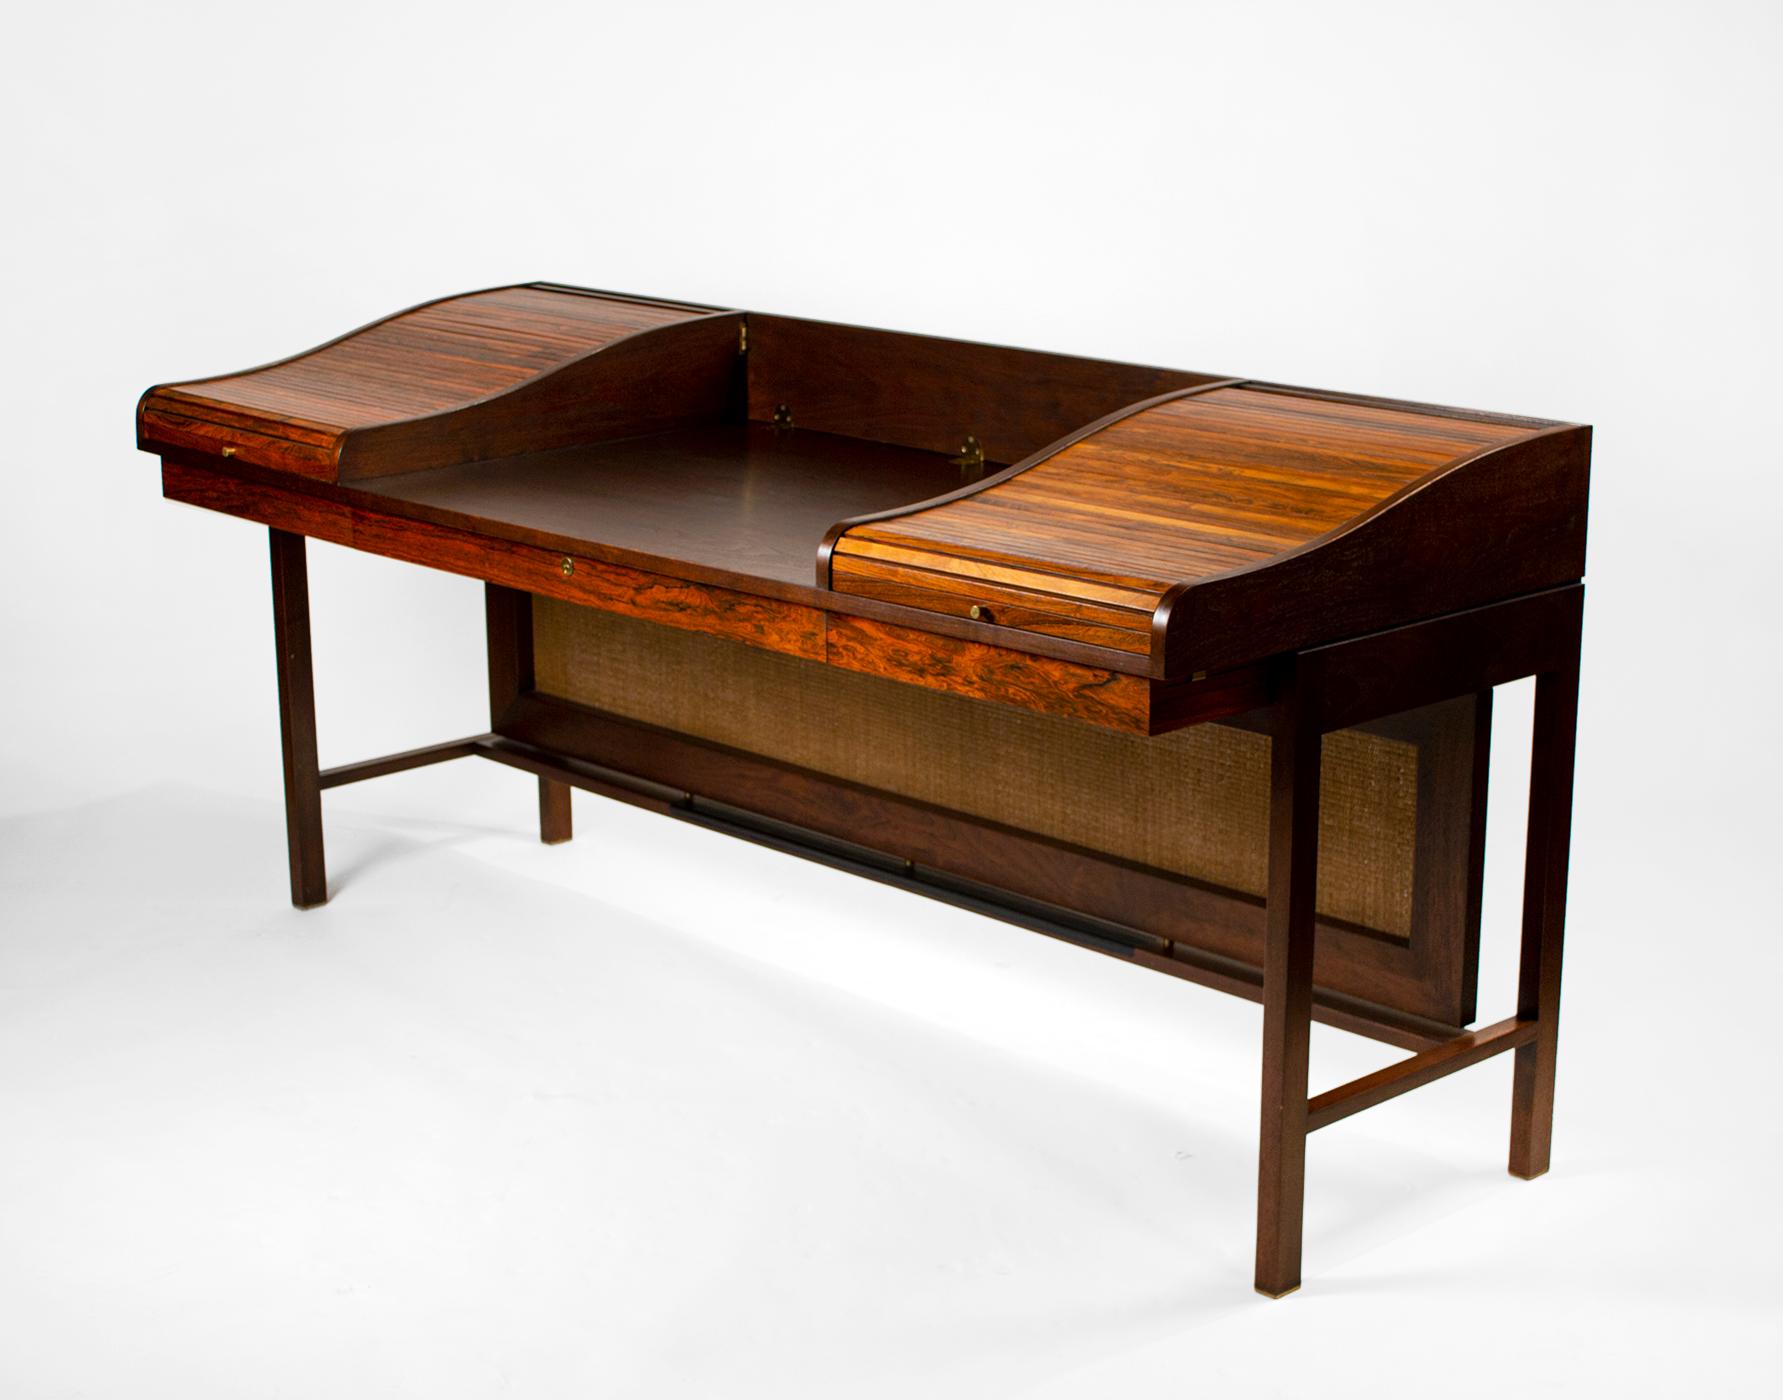 This rare beauty was designed to keep your office space uncluttered. The body of the desk is crafted from American walnut, the tambours are solid Brazilian rosewood and the sabots are solid brass. The bottom stretcher has an inset of black leather.